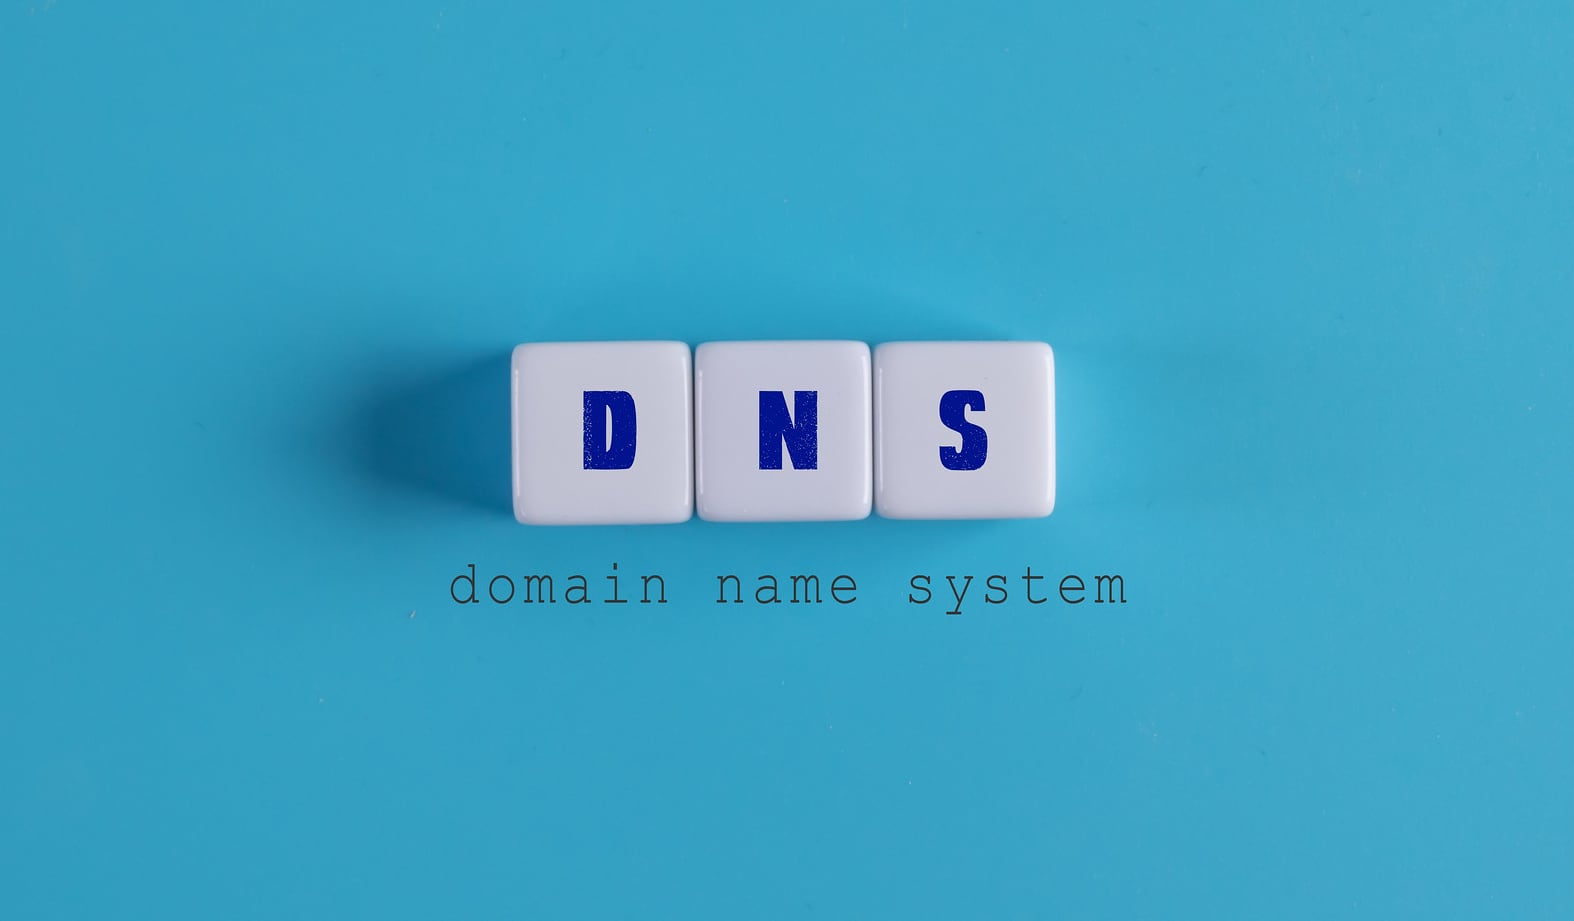 article hero image of DNs in block letters